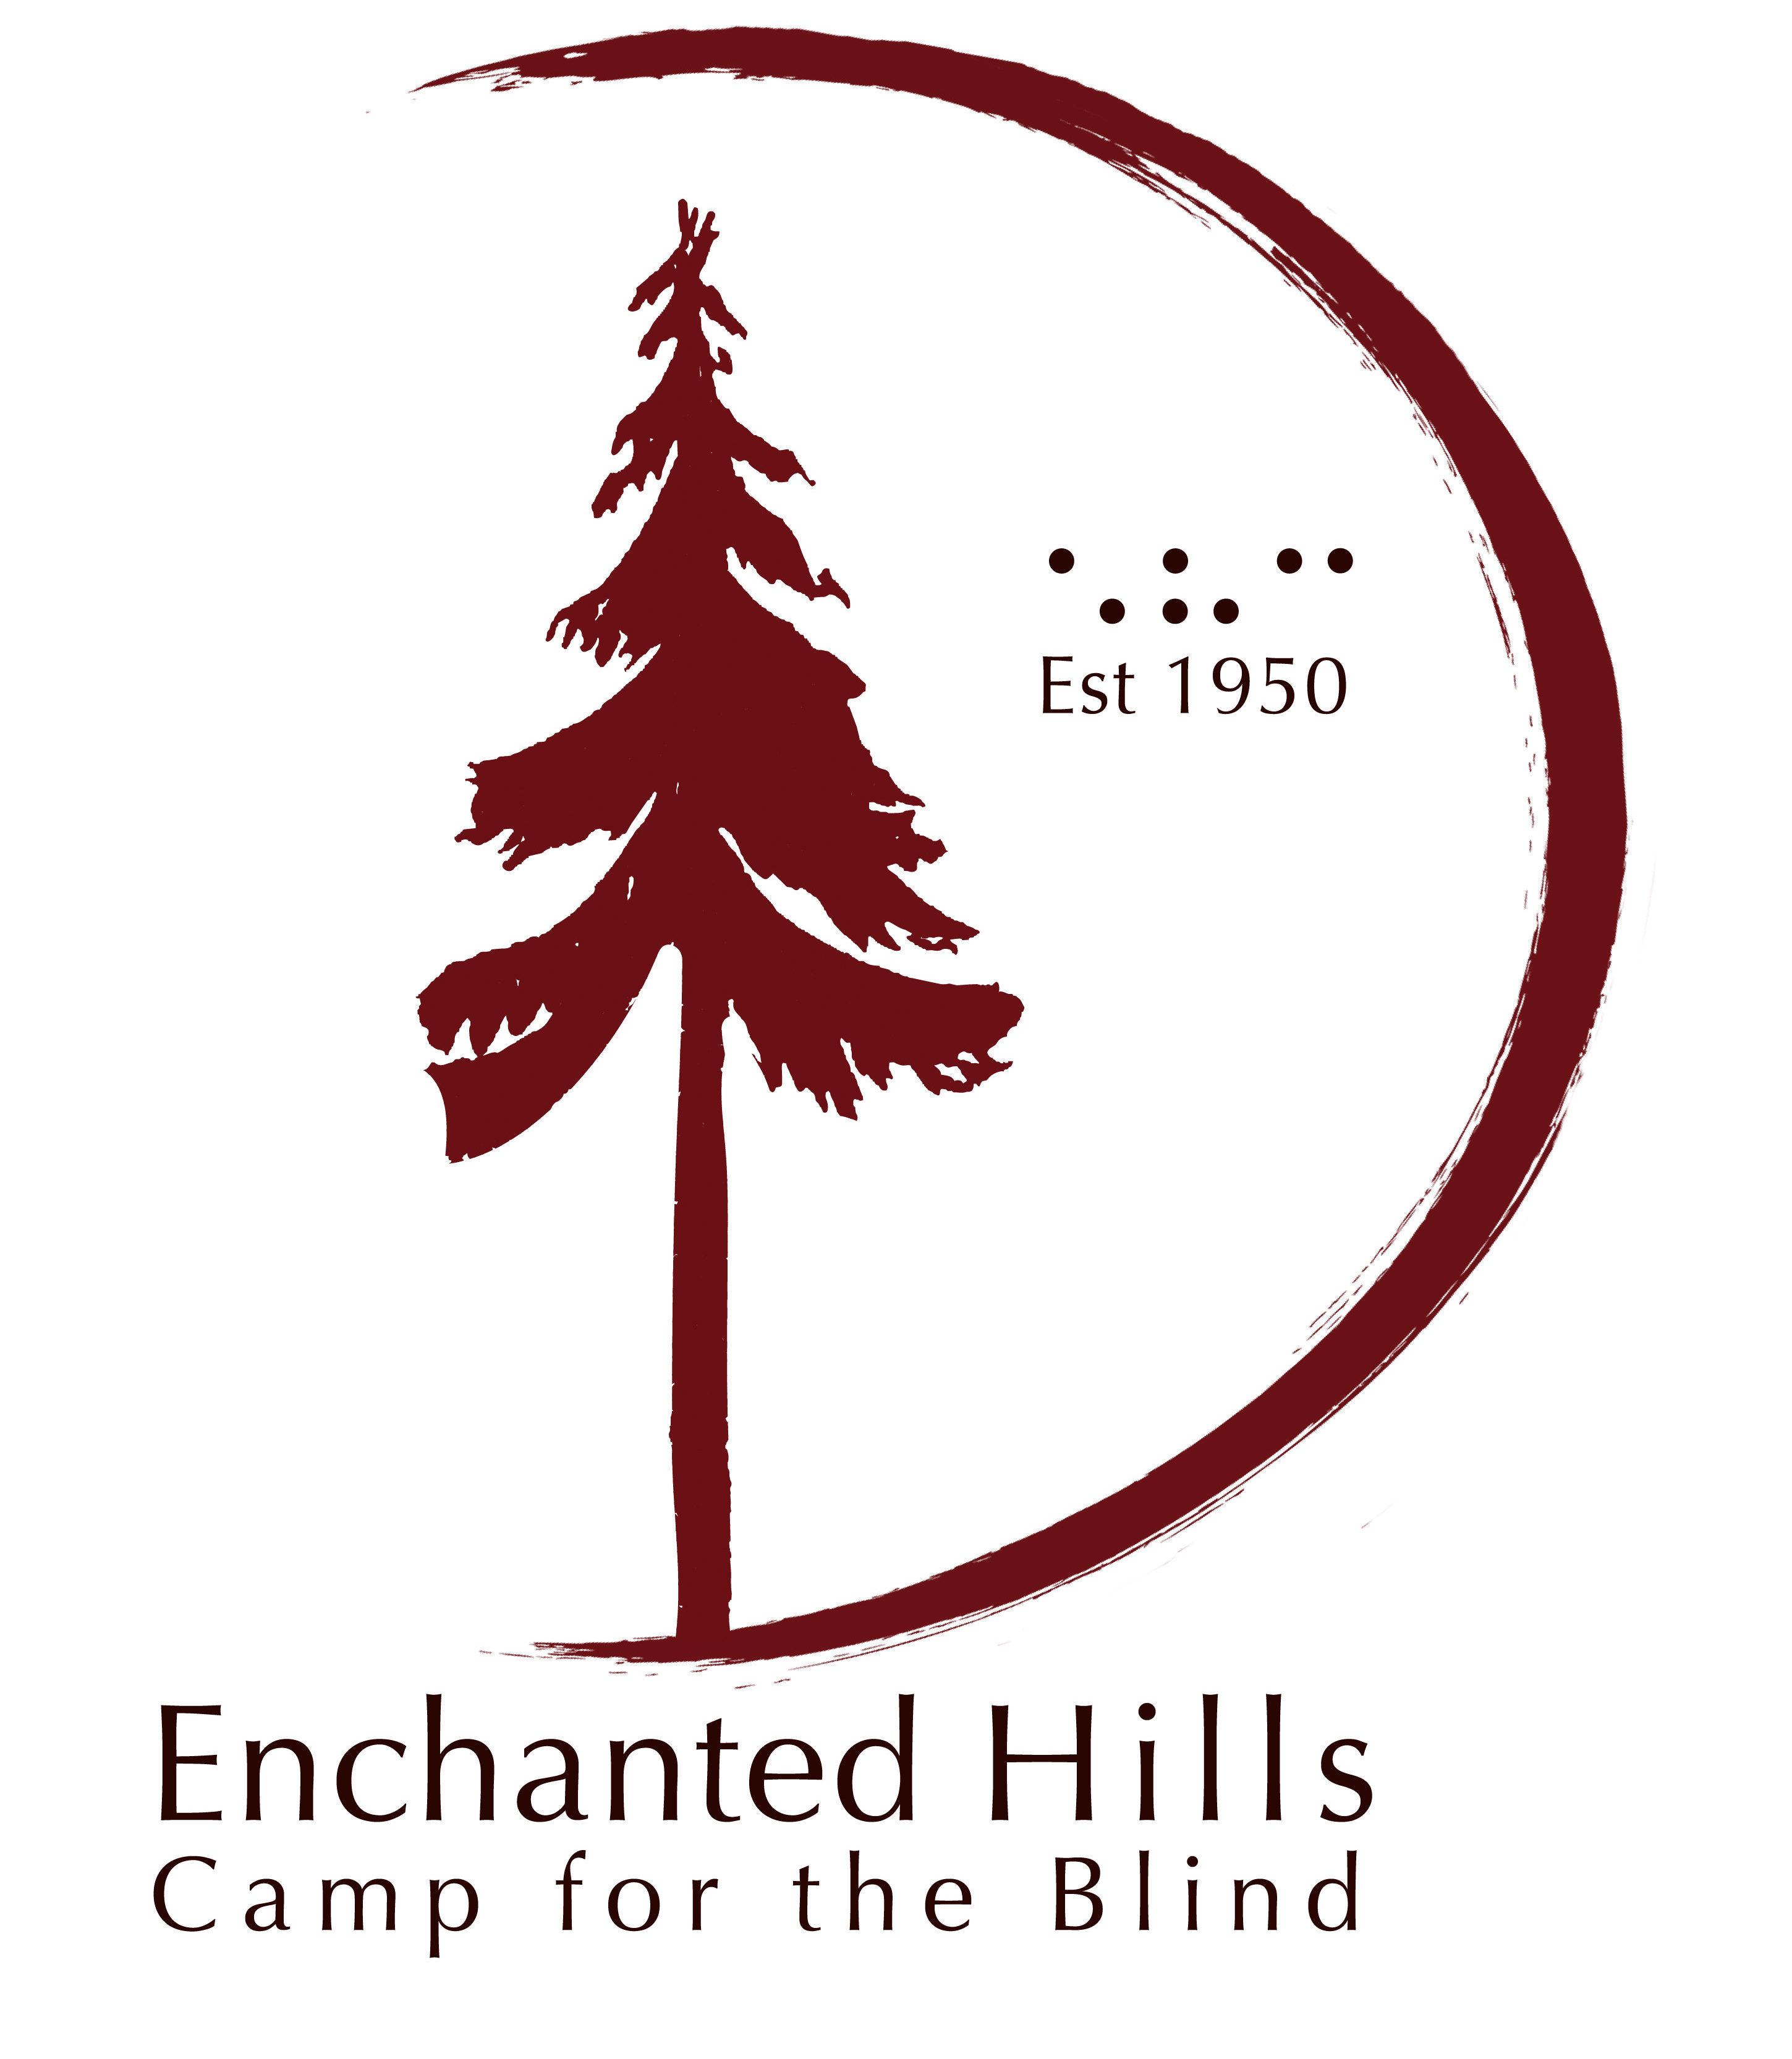 EHC Logo - The Summer 2017 Enchanted Hills Camp Schedule is here! - LightHouse ...